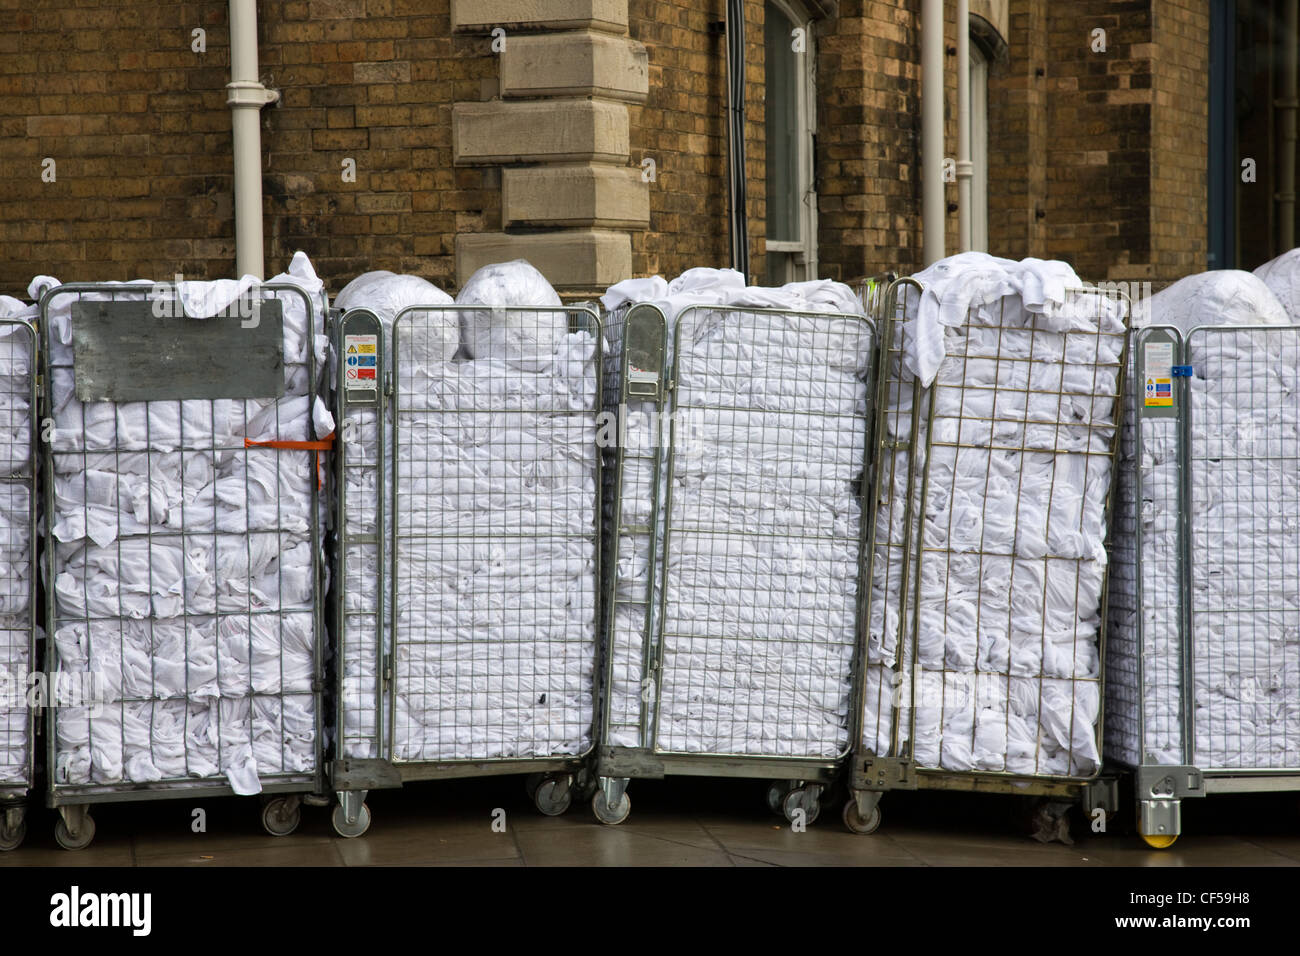 Freshly laundered towels and bed linen in a trolley outside a hotel Stock Photo